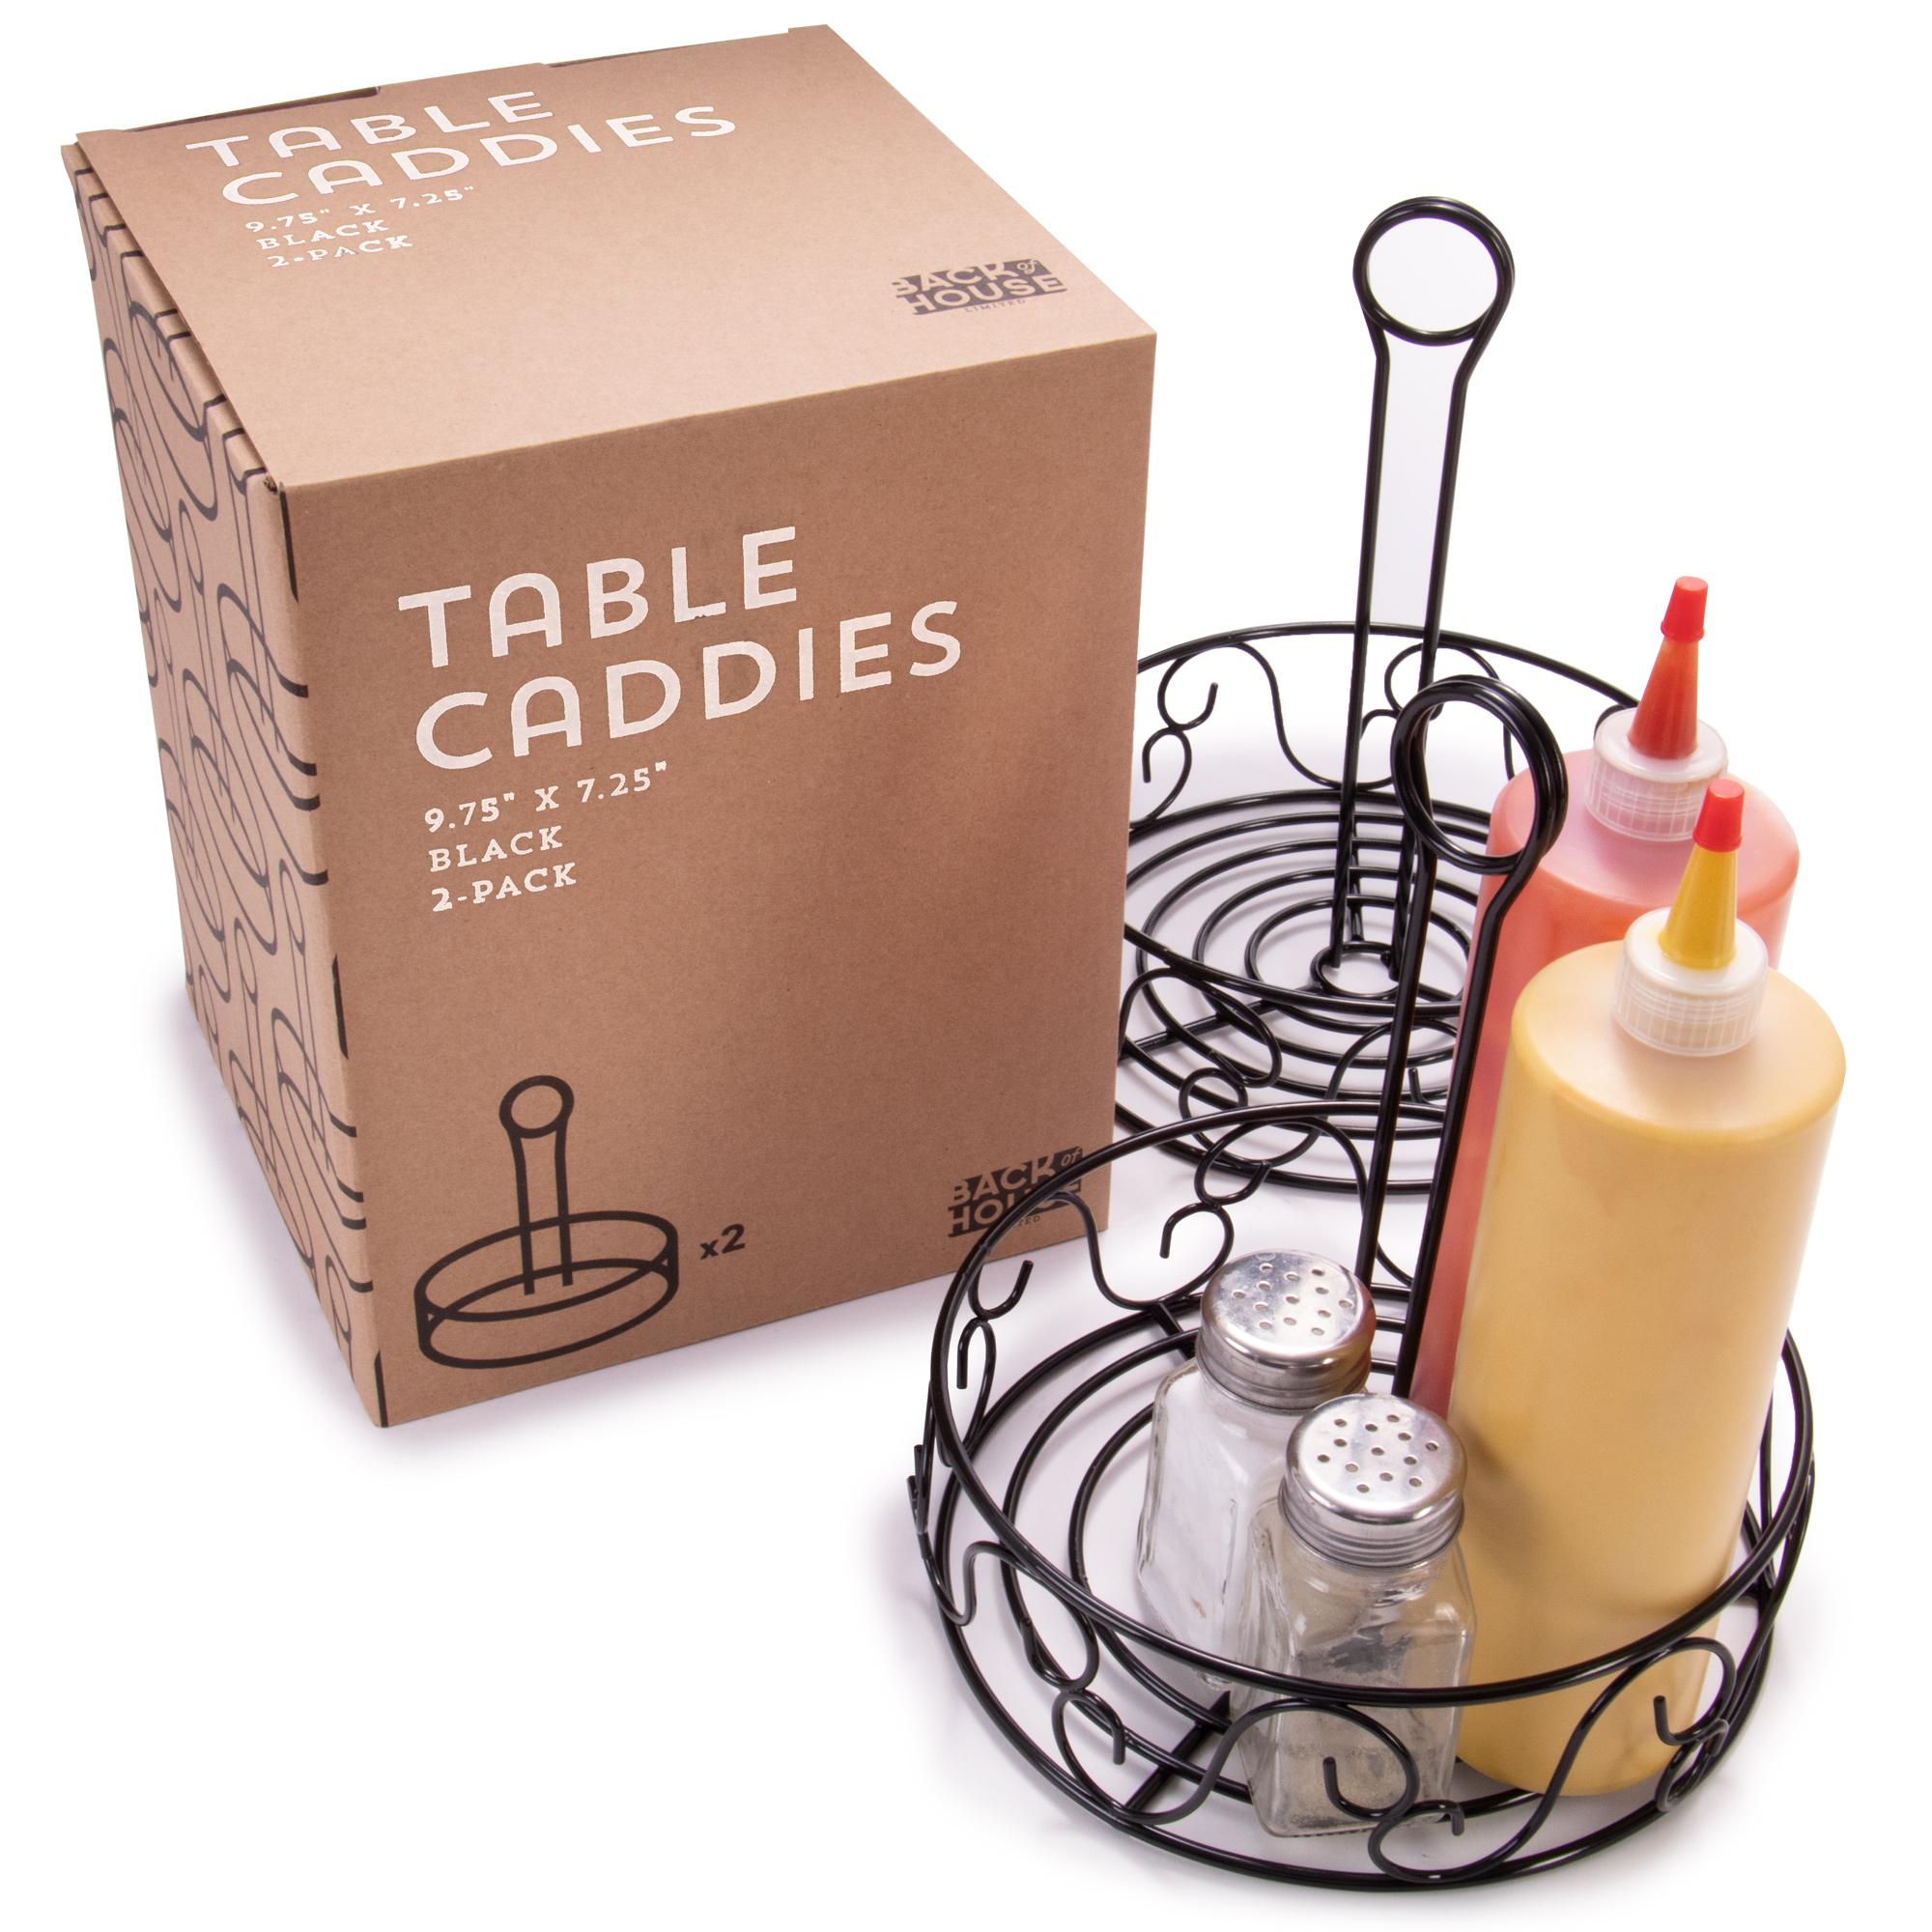 Black Table Caddy, 2-pack